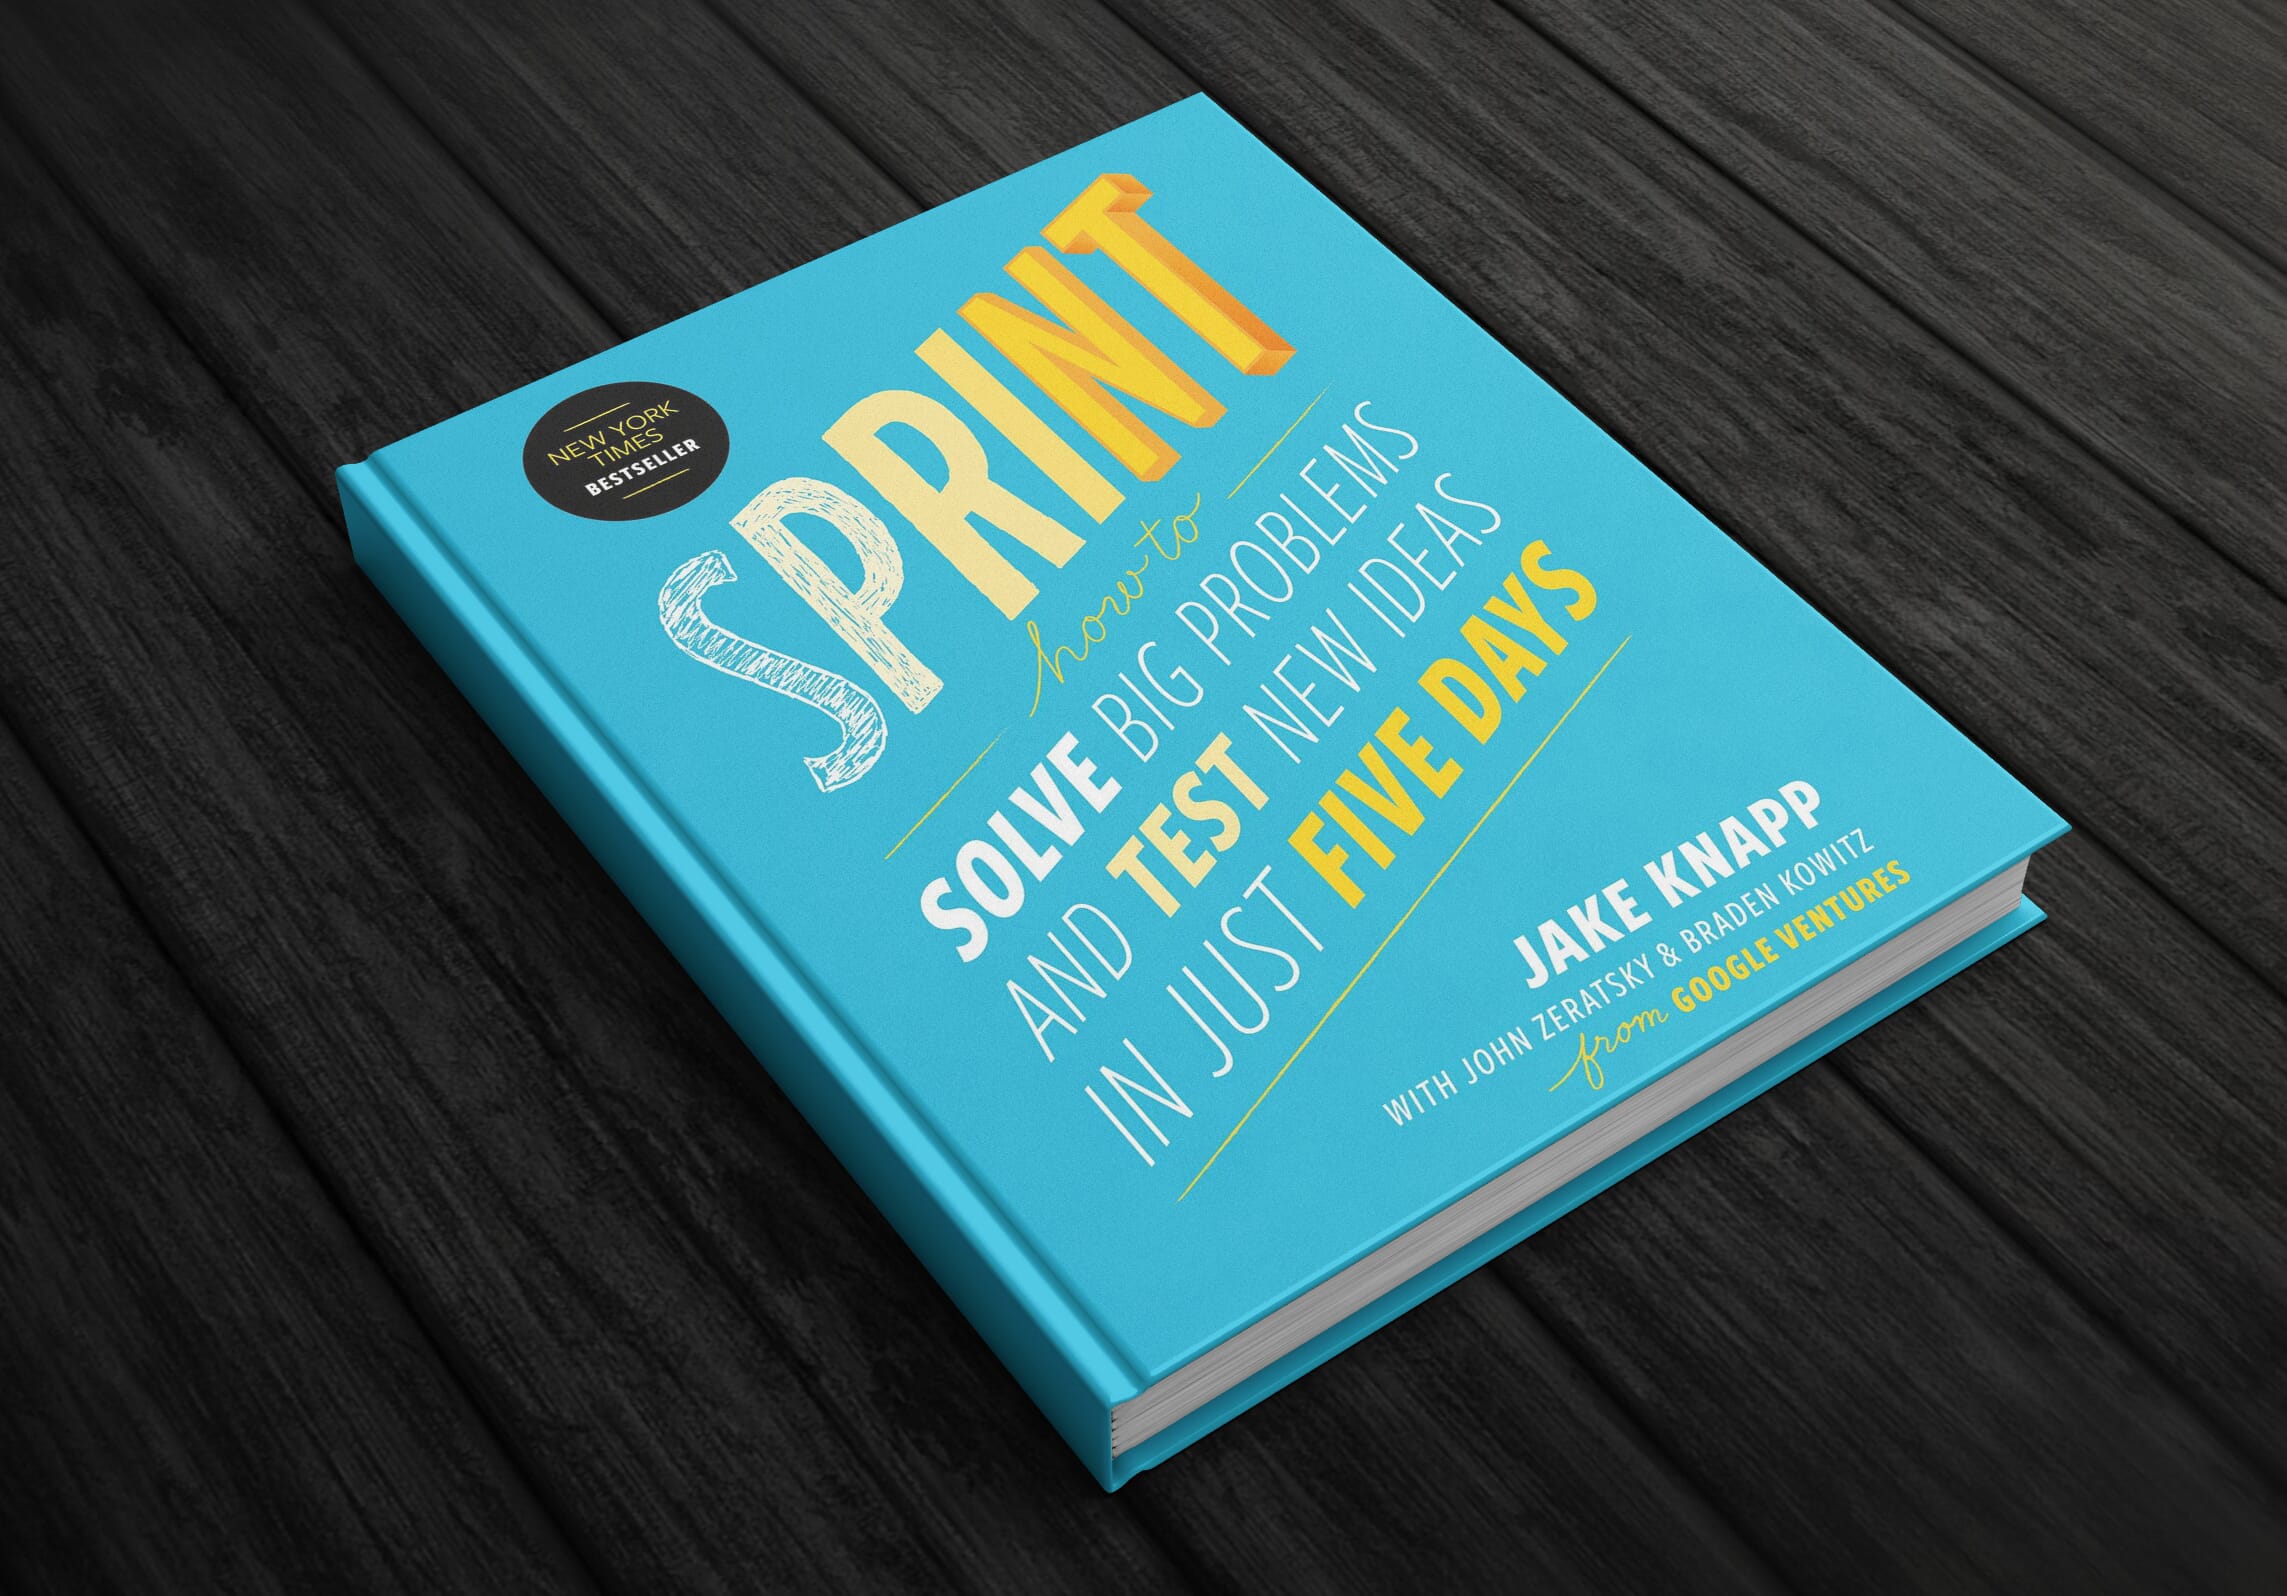 Design sprints are just one of the brainstorming tools that have broken into the business world.